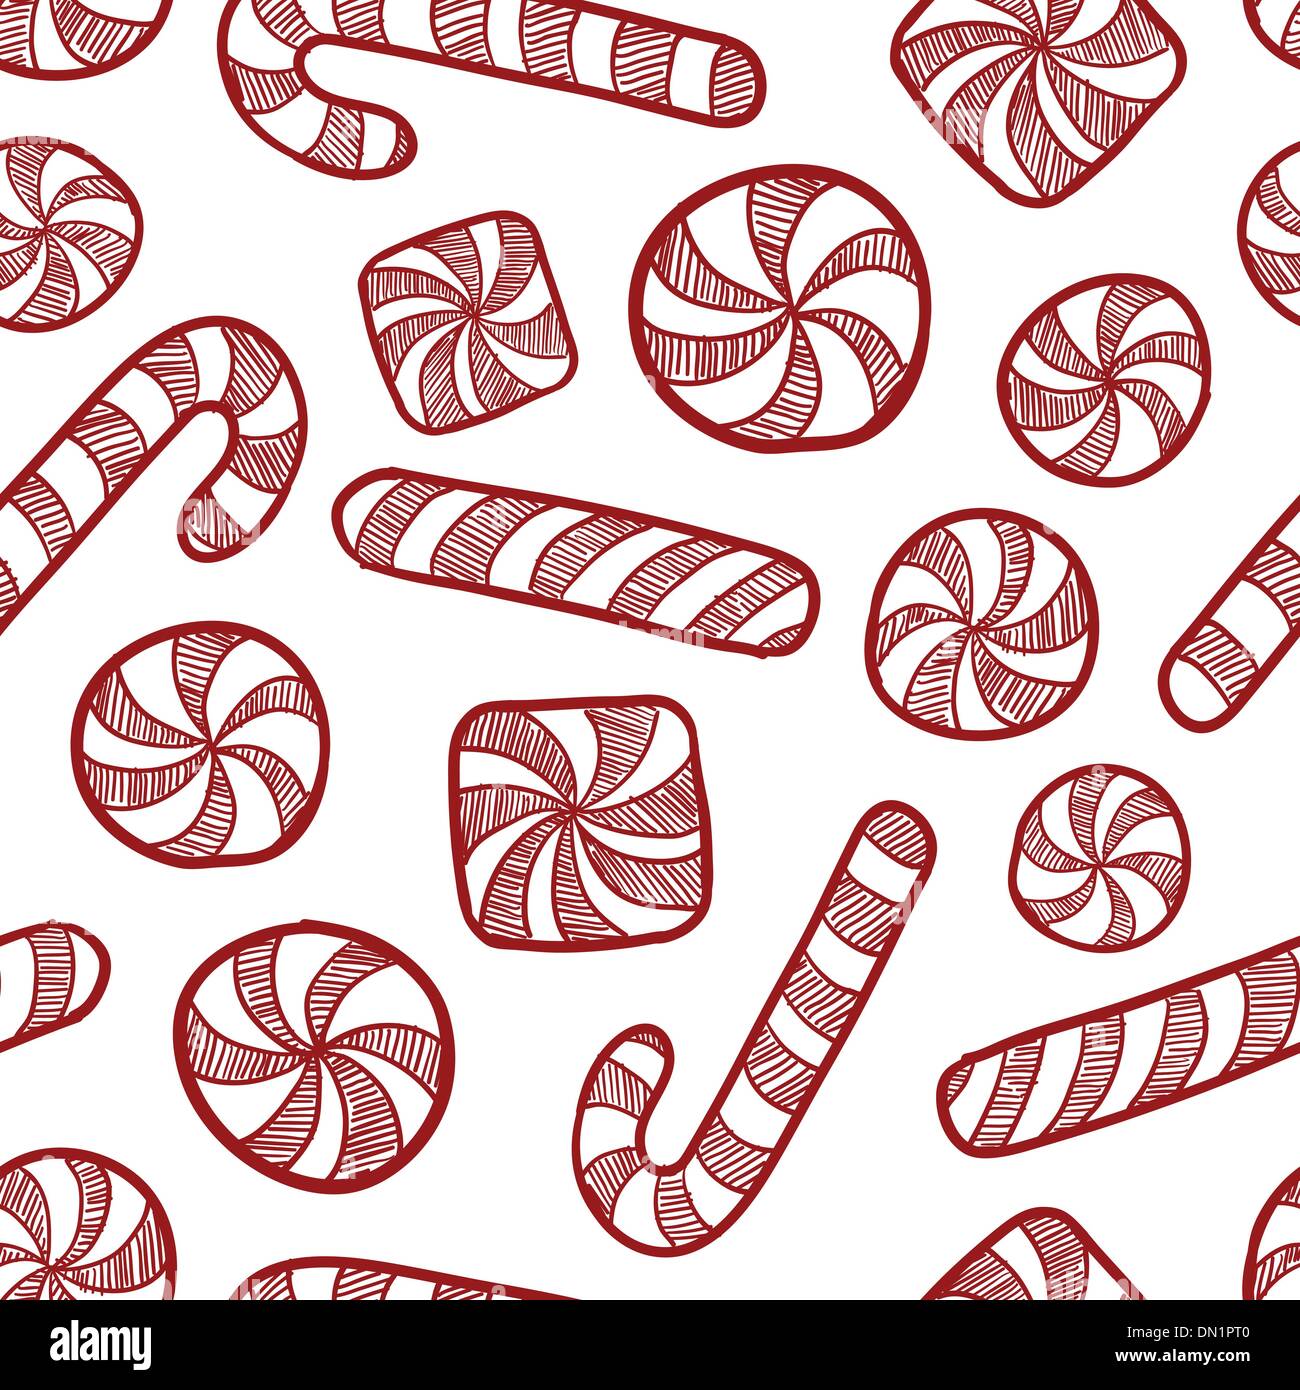 Seamless candy cane vector background Stock Vector